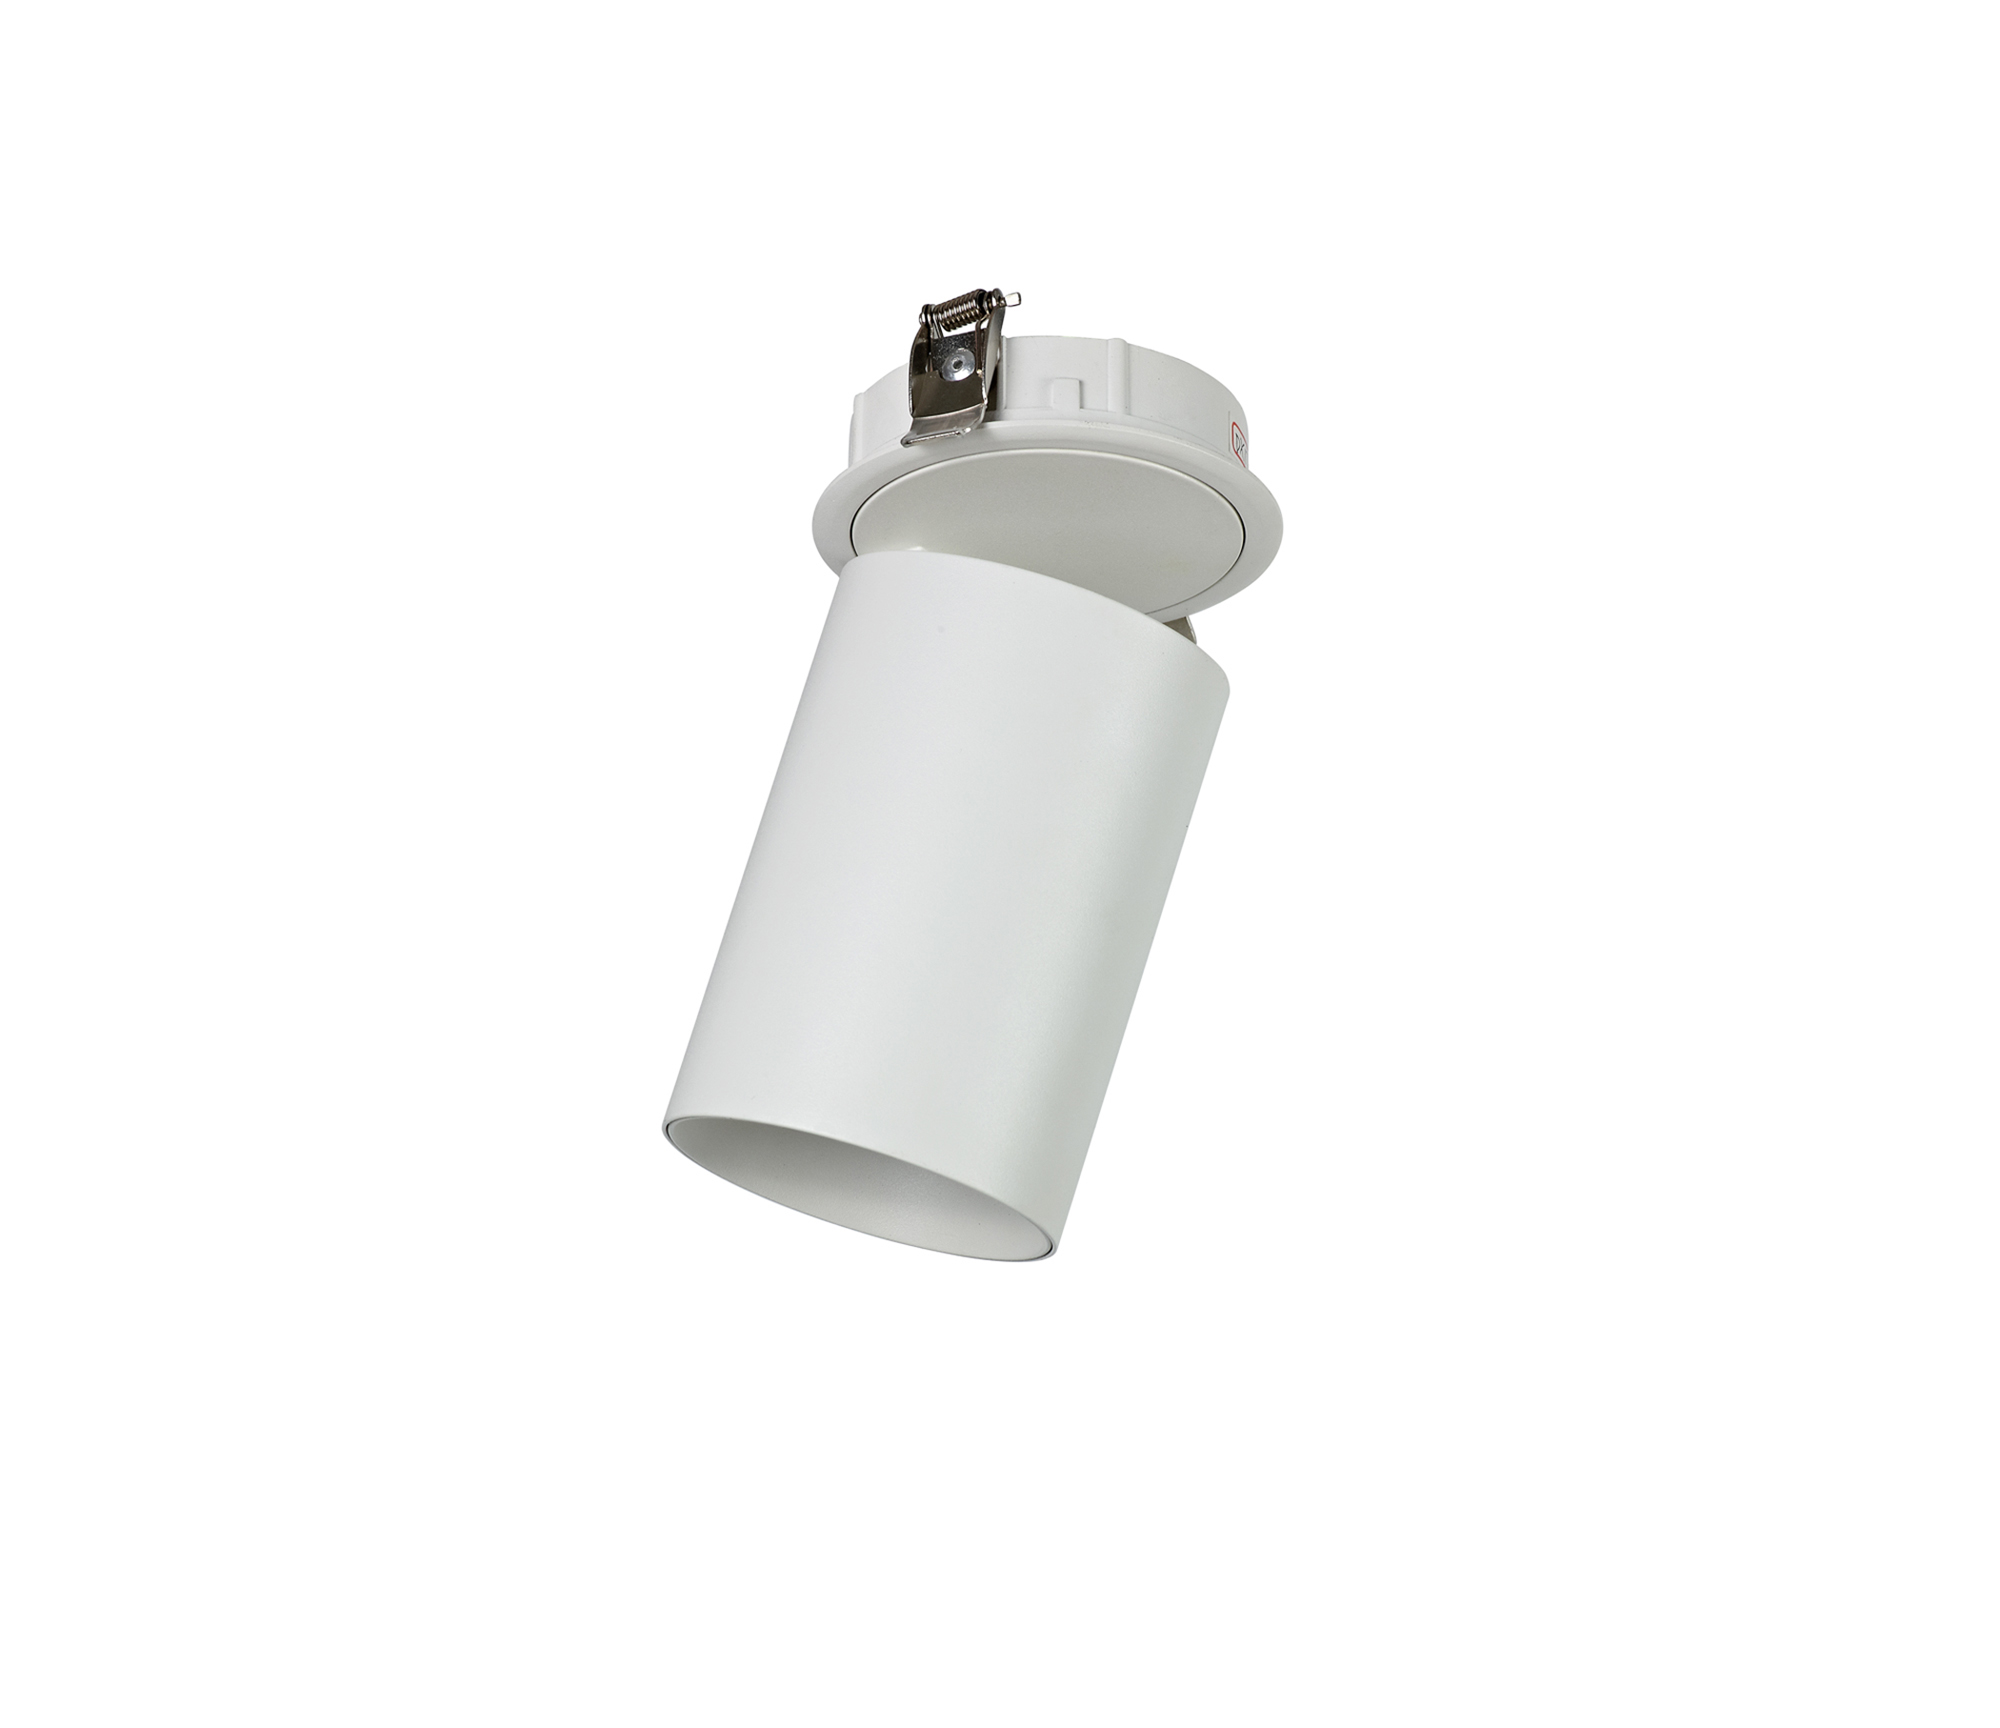 DX170005  Eos A 20; White & White; Recessed Base LED Spotlight; C/W 20W 450mA Driver; WITHOUT LED Engine; IP20; 5yrs Warranty